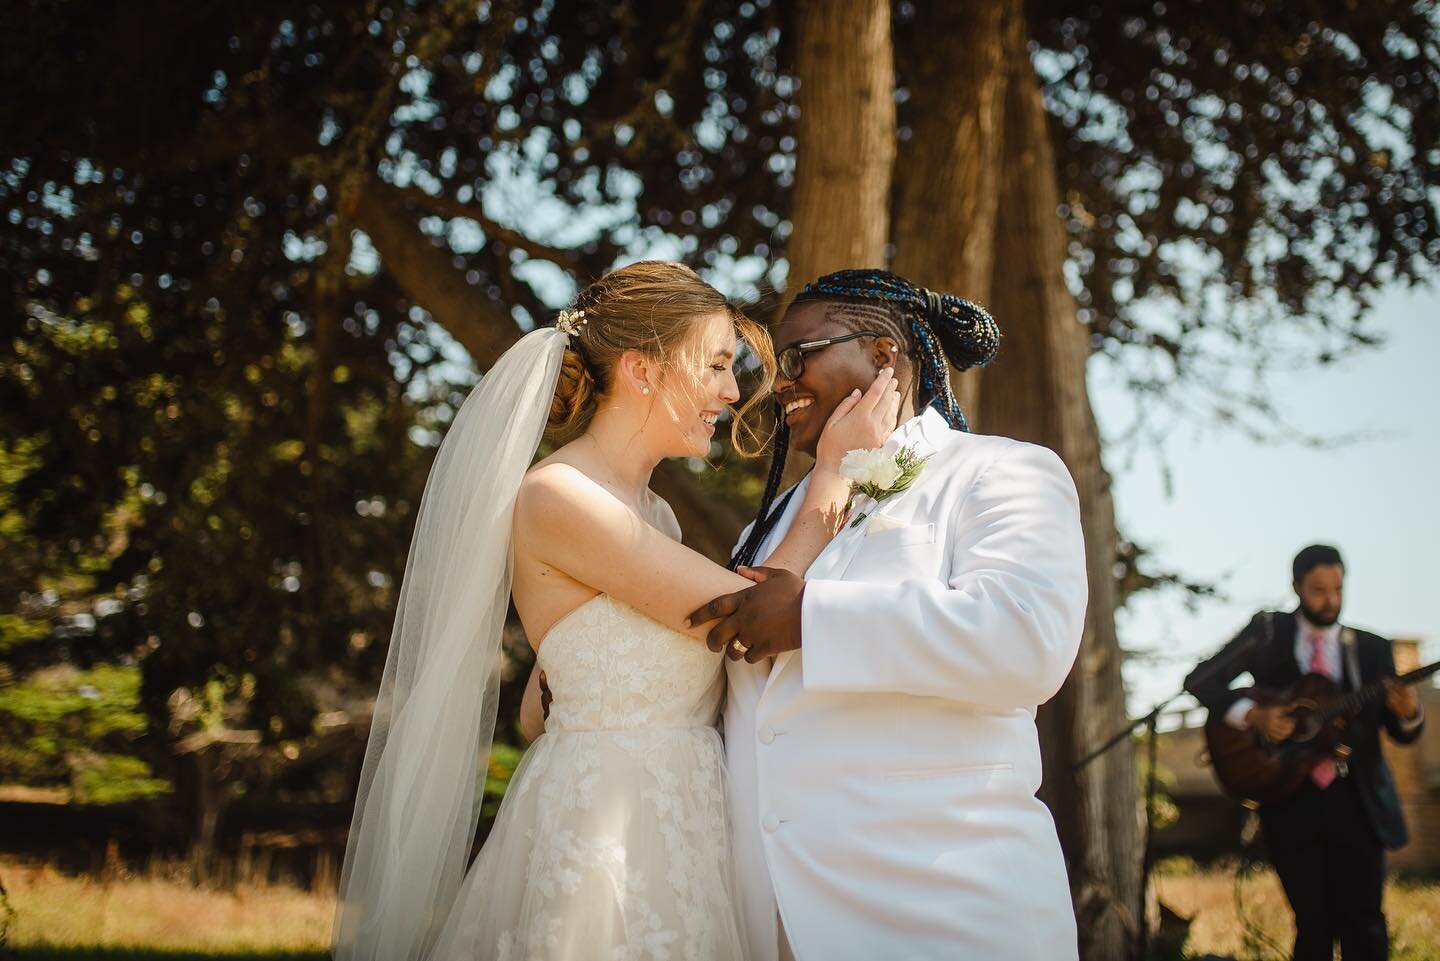 @portraitofayoungcouple &quot;A pair of queer, Christian women connect over their love for making music, and create harmony at the intersection of their faiths and identities.&quot;

If we see each other in-person sometime soon, I'll tell you the ful